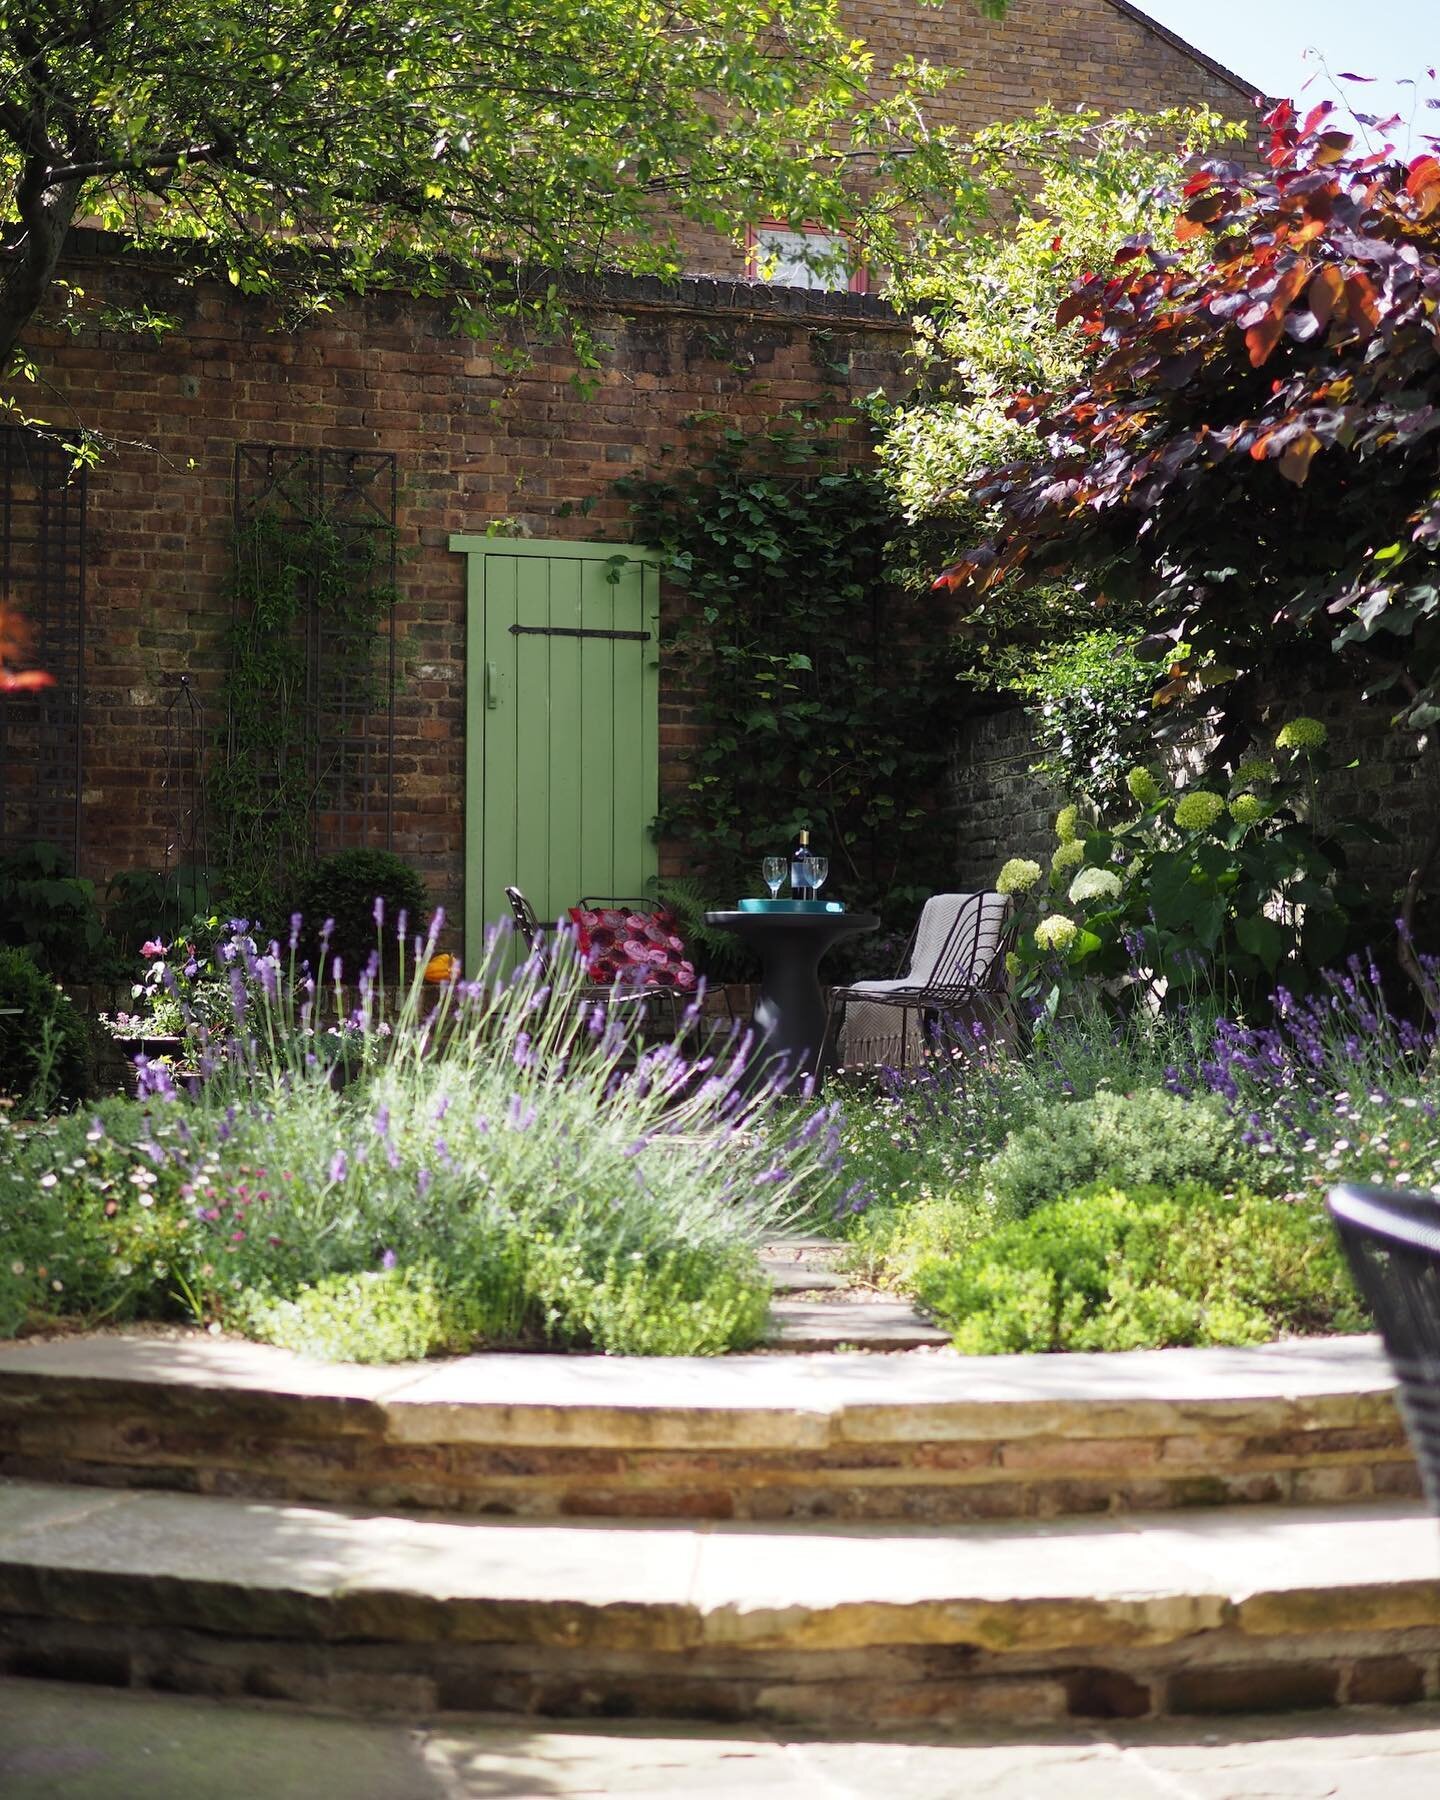 Steppingstones through low mounds of mediterranean planting create a beautiful journey in this north London small courtyard garden. The false door in the rear wall gives a sense of space beyond, opening this beautiful enclosure out in the mind&rsquo;